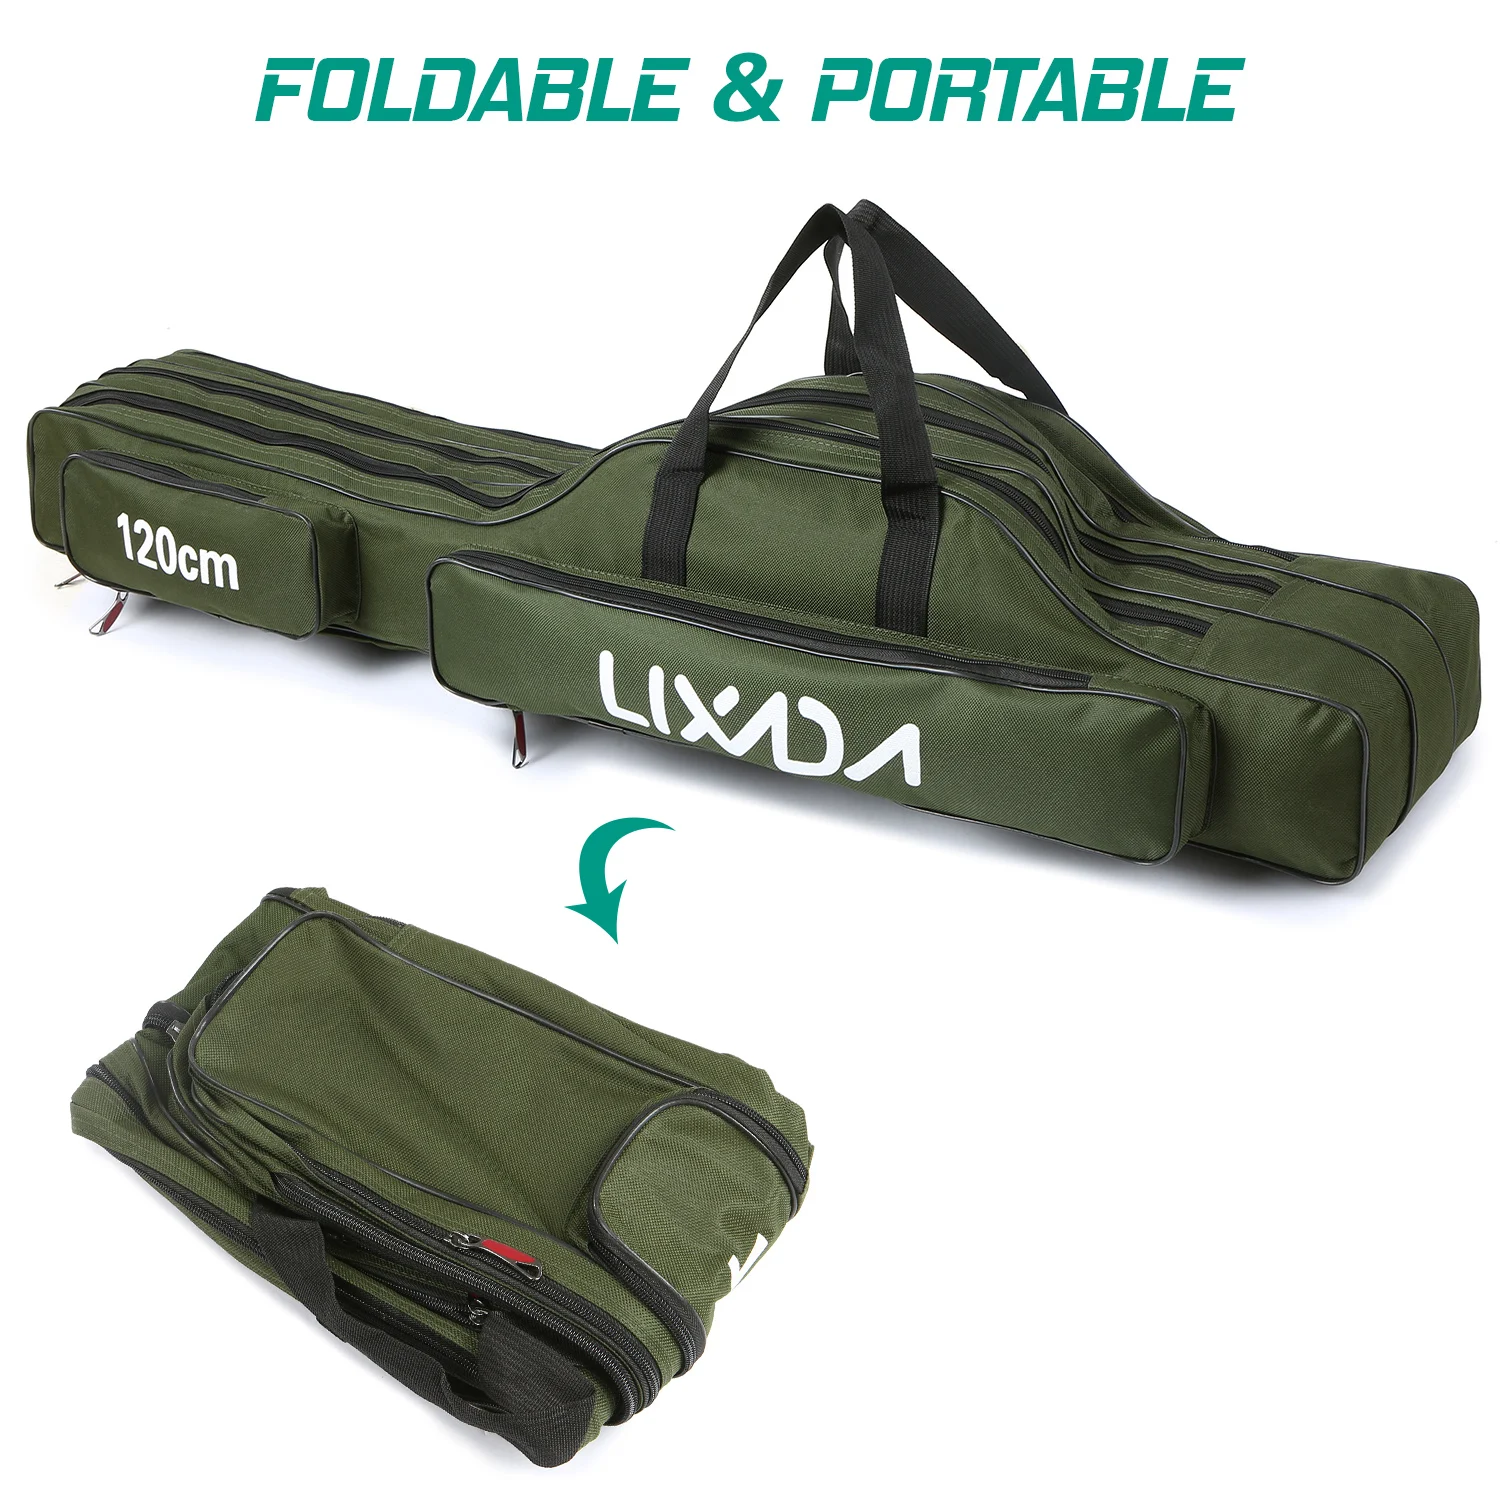 https://ae01.alicdn.com/kf/H2ab9b8c50fd34cb48fdc395b956e731cZ/3-Layers-Fishing-Pole-Bag-Portable-Folding-Rod-Carry-Case-Carrier-Travel-Bag-Fishing-Reel-Tackle.jpg